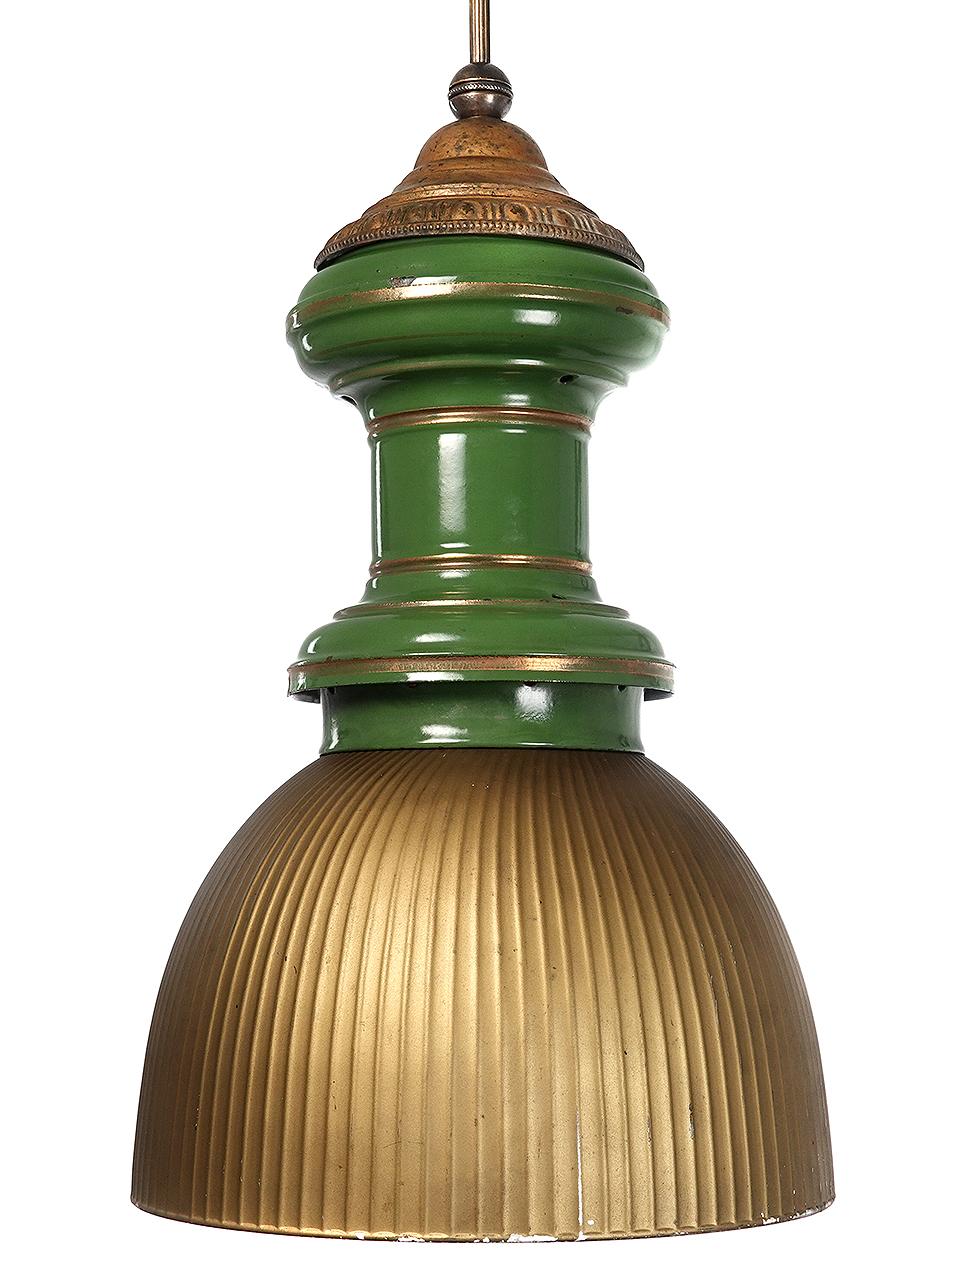 This early gas lamp has a look all its own. The fixture body is green enamel with gold highlights. The deep domed shade is one of the largest mirrored mercury glass example we have seen. The shade has its original paint and mirror. The mirror shows